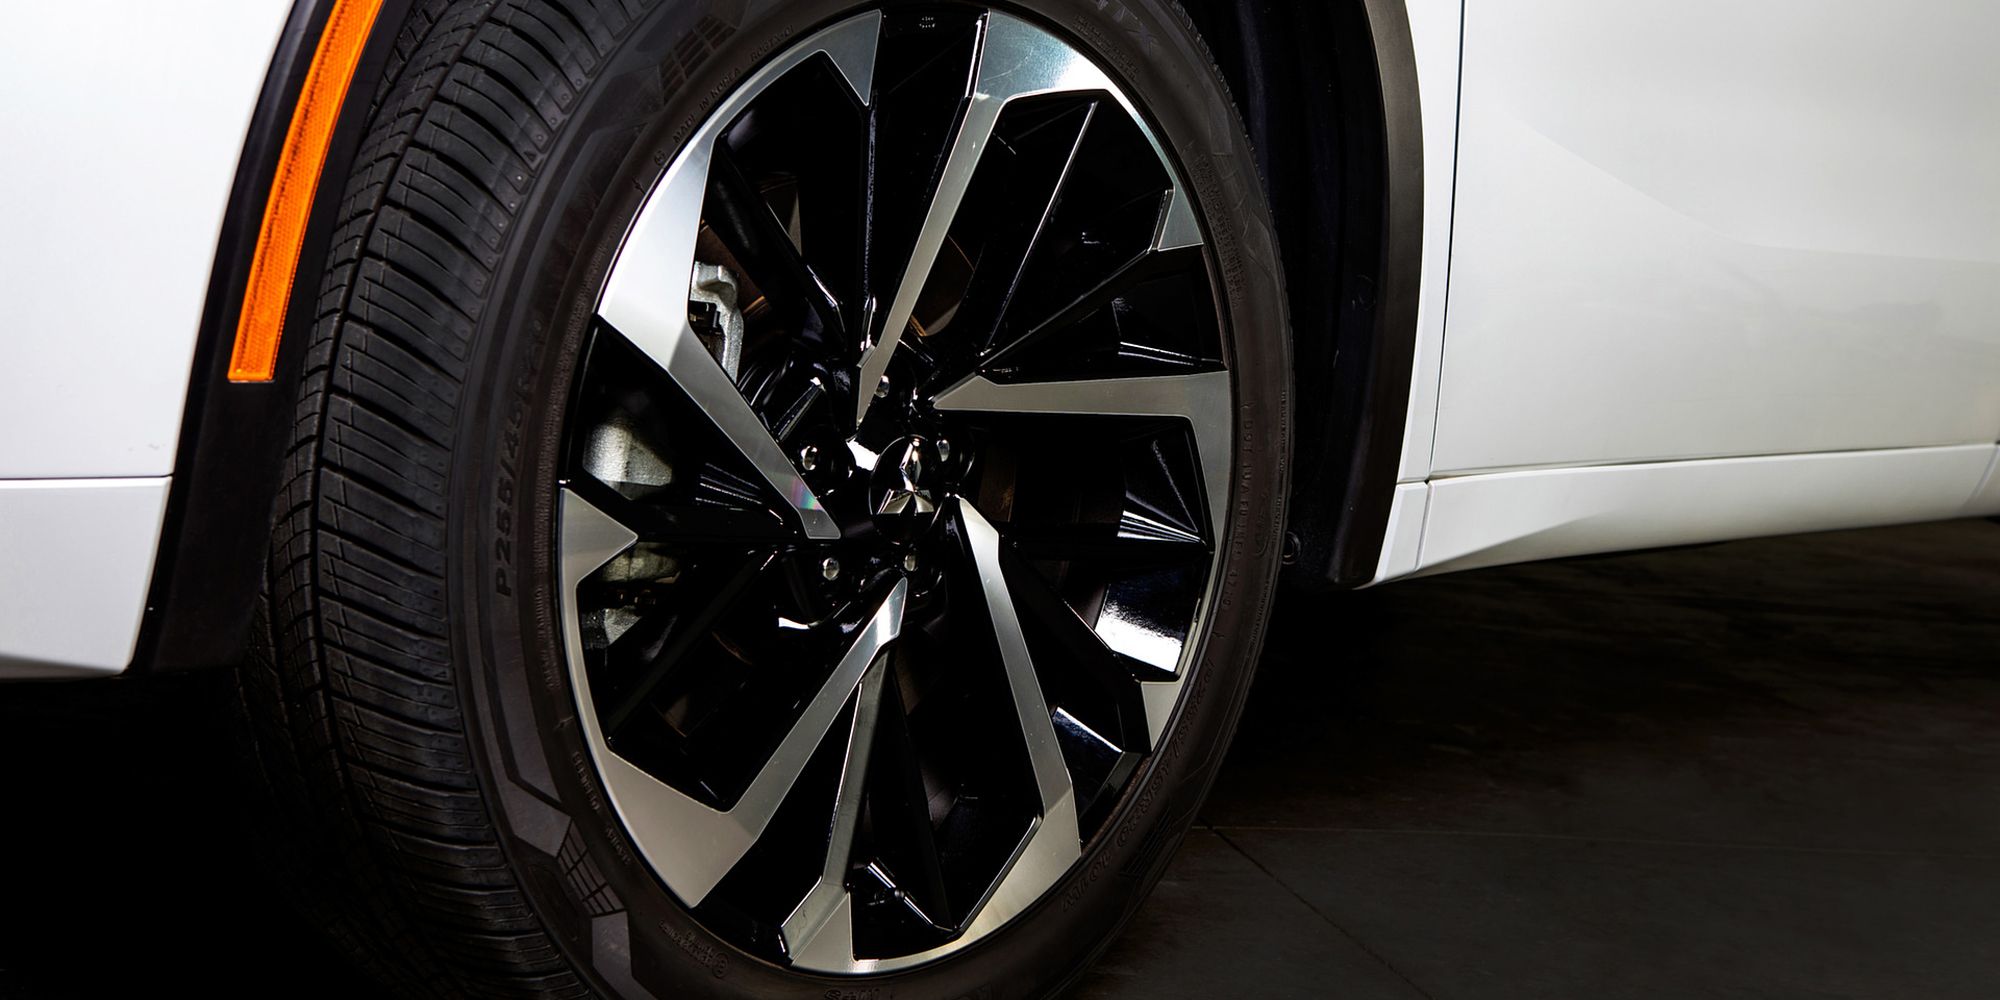 The alloy wheels of the new Outlander